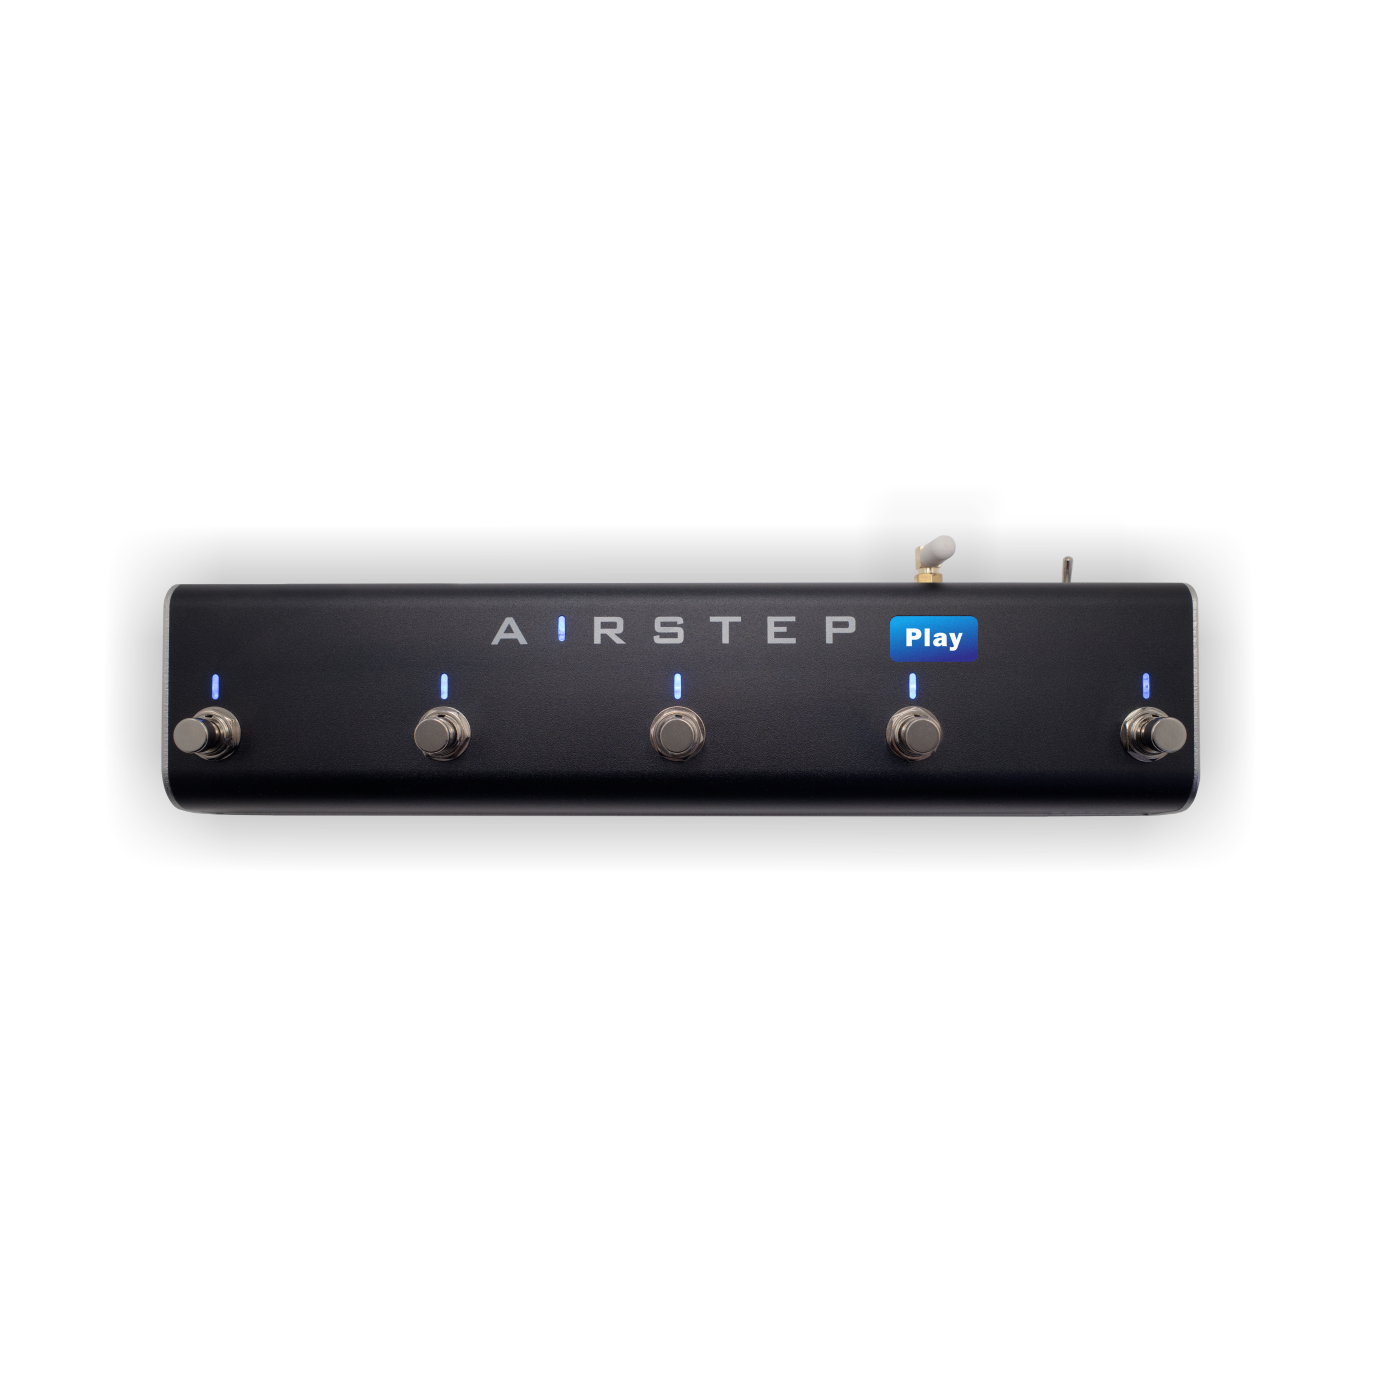 AIRSTEP Play | Online Video & Audio Hands-free Controller